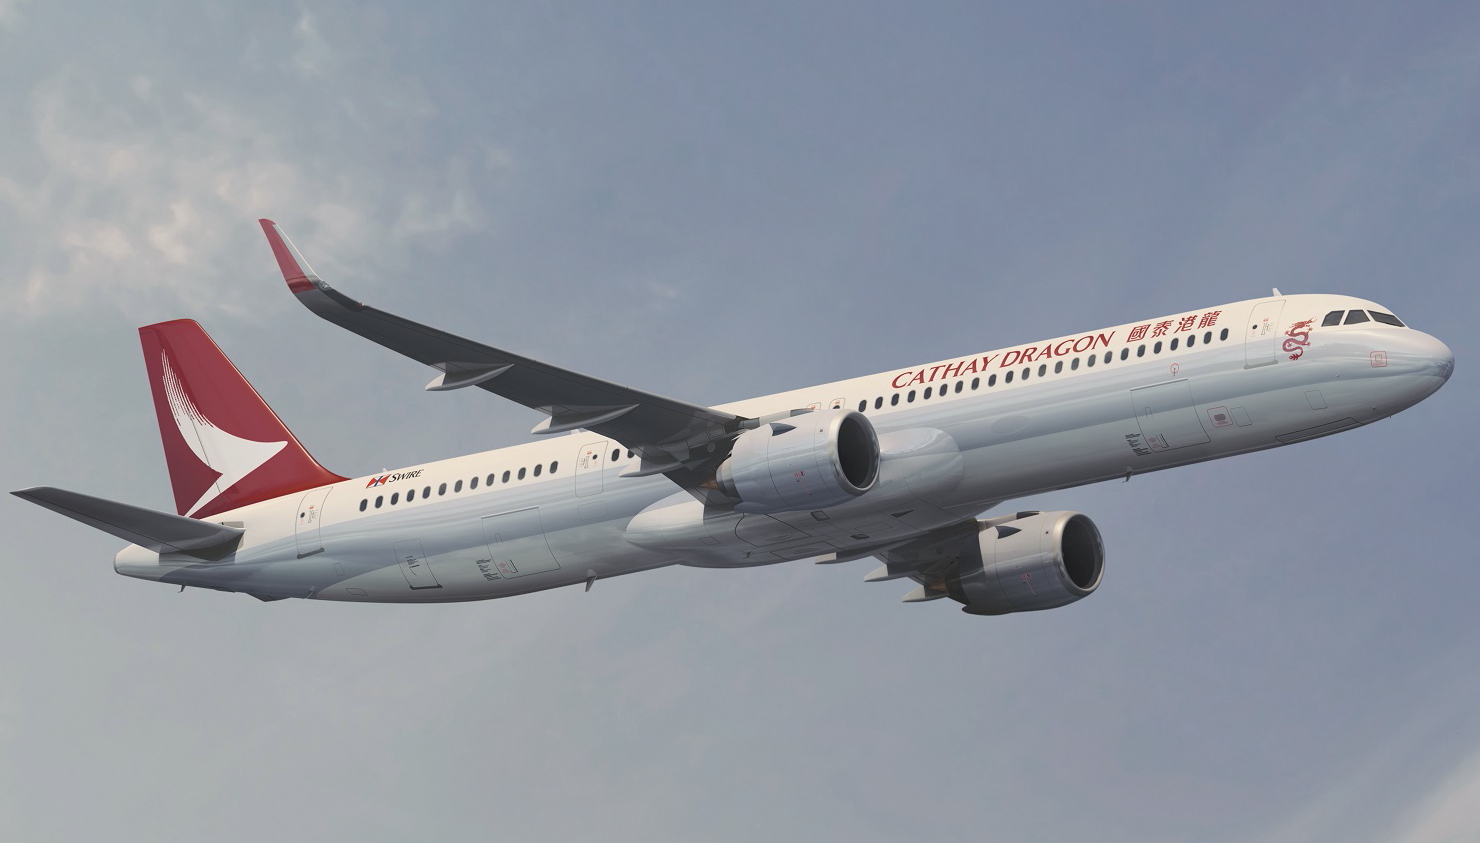 Cathay Dragon has signed a memorandum of understanding (MOU), preparatory to executing formal legal documentation, for the acquisition of 32 Airbus A321neo aircraft. Click to enlarge.